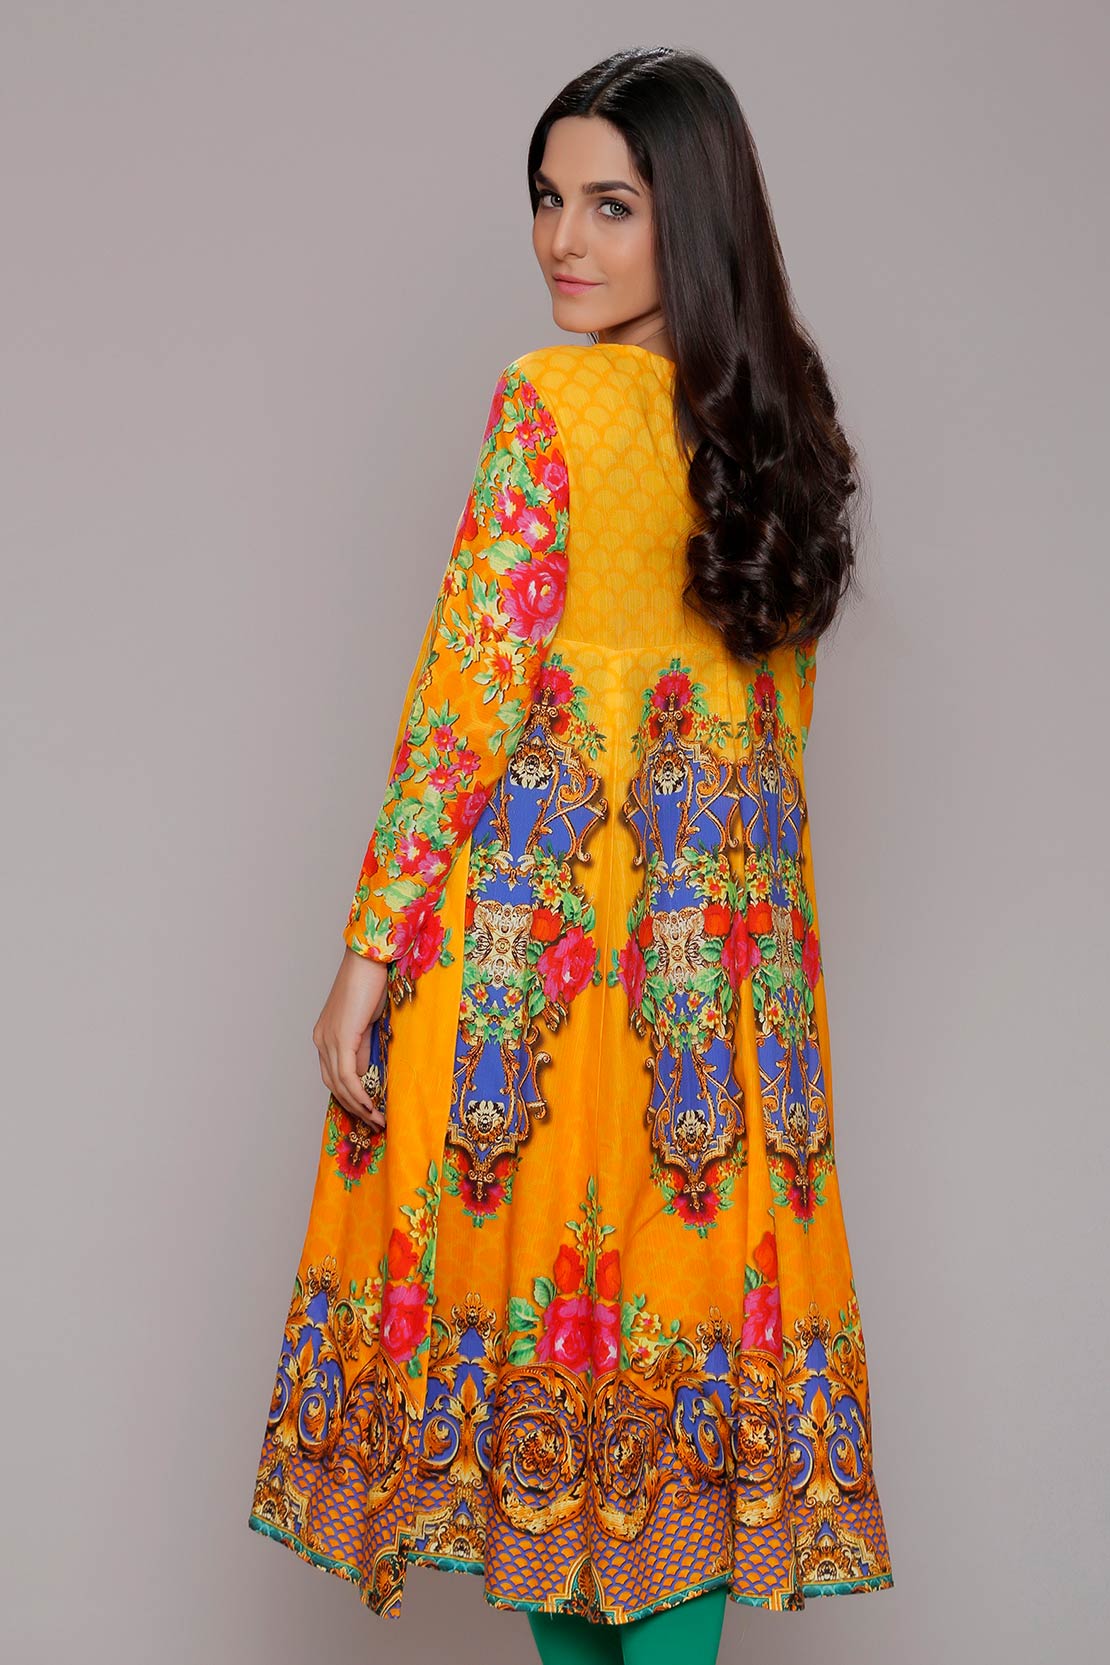 Funky yellow printed rady to wear top by Rang ja collection 2018 